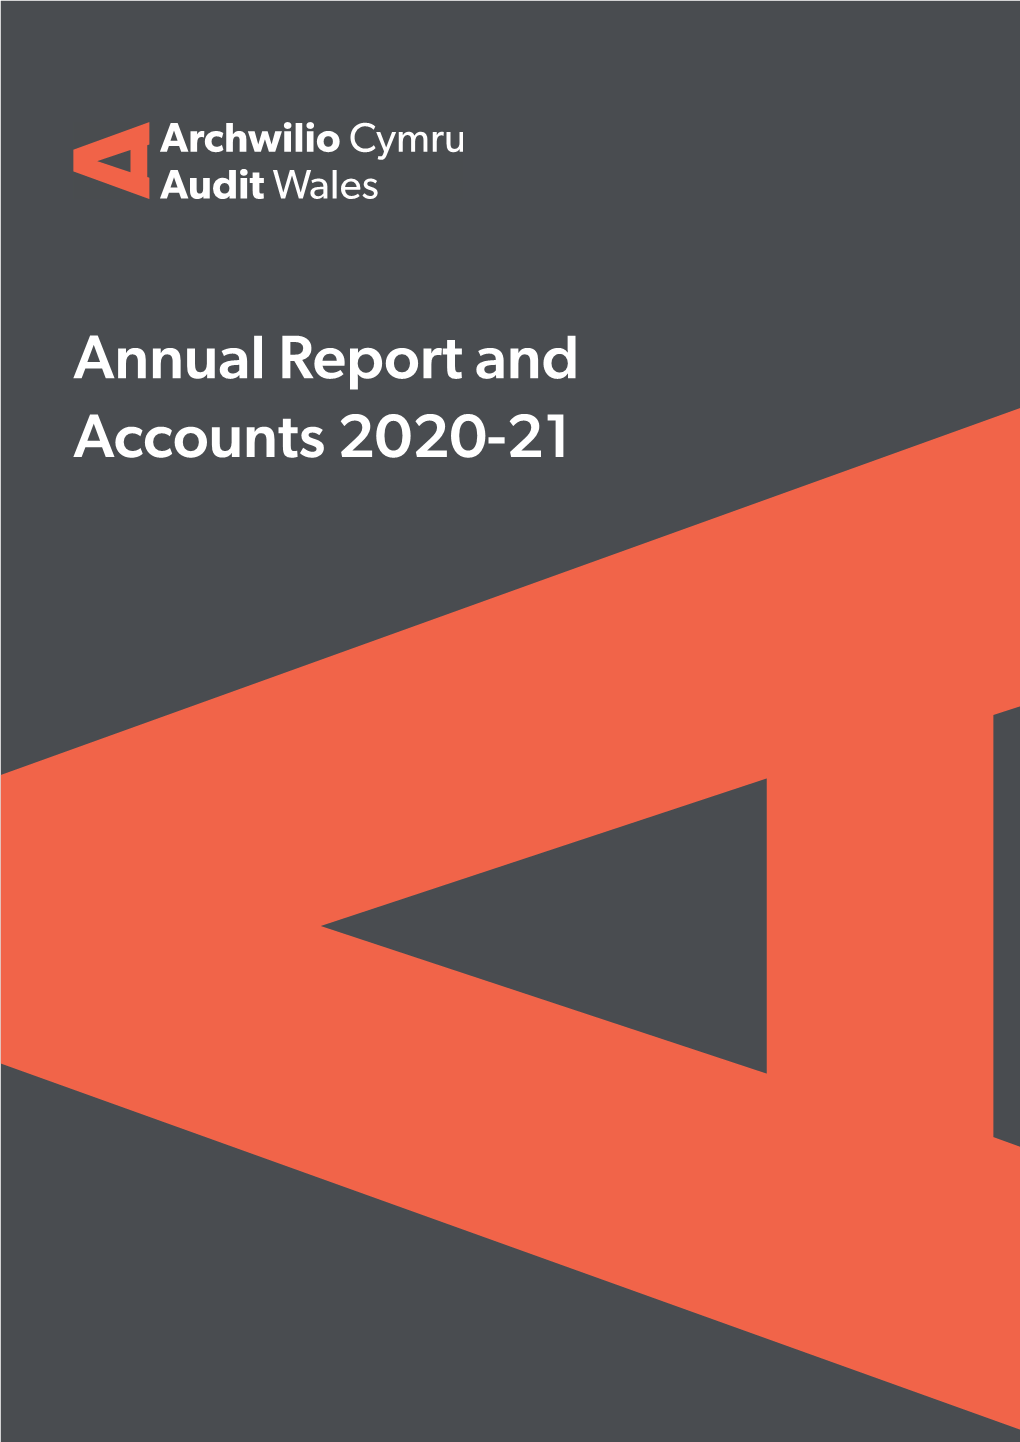 Annual Report and Accounts 2020-21 Page 2 Annual Report and Accounts 2020-21 Page 3 Annual Report and Accounts 2020-21